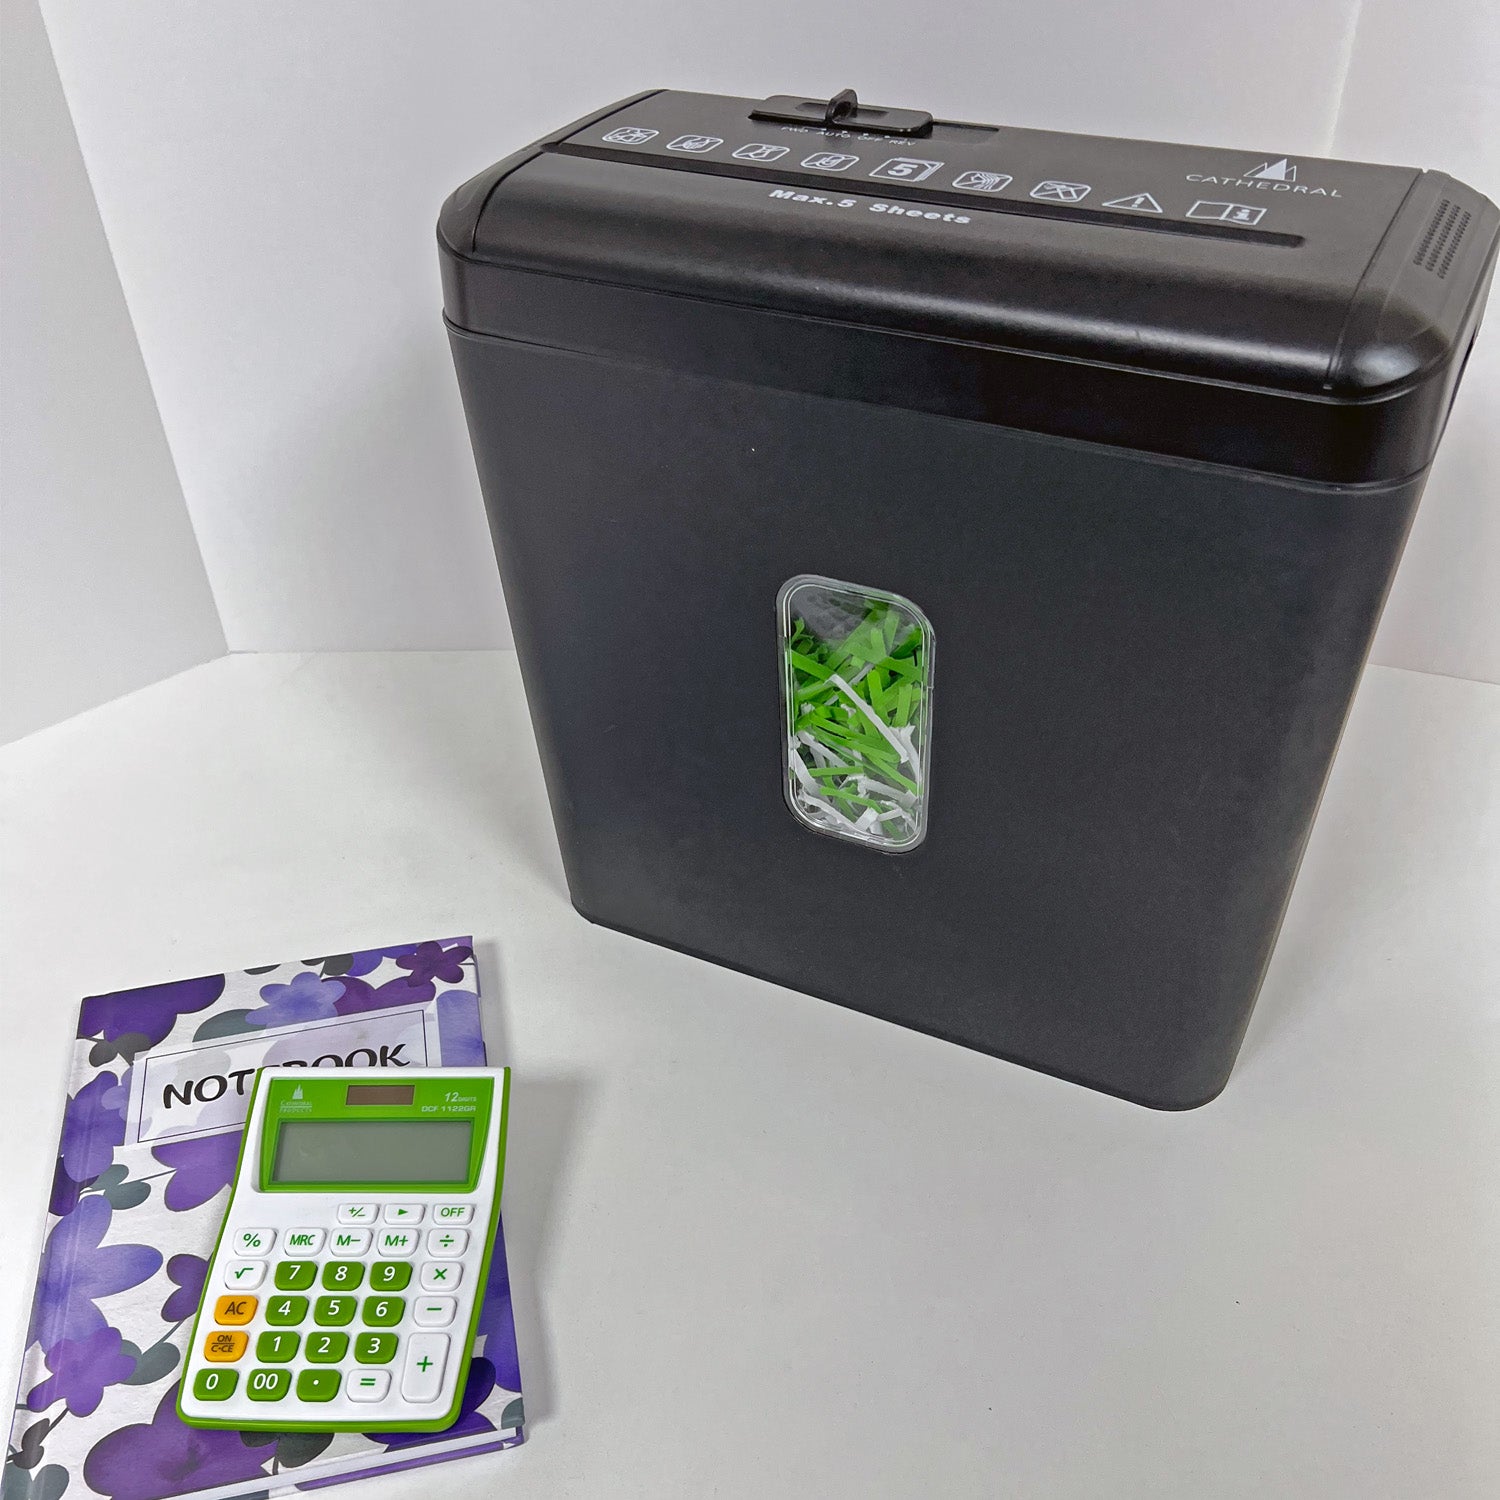 Black Cathedral Products cross cut paper shredder with shredded paper visible in the front window, accompanied by a purple floral notebook and a green calculator, on a white background.